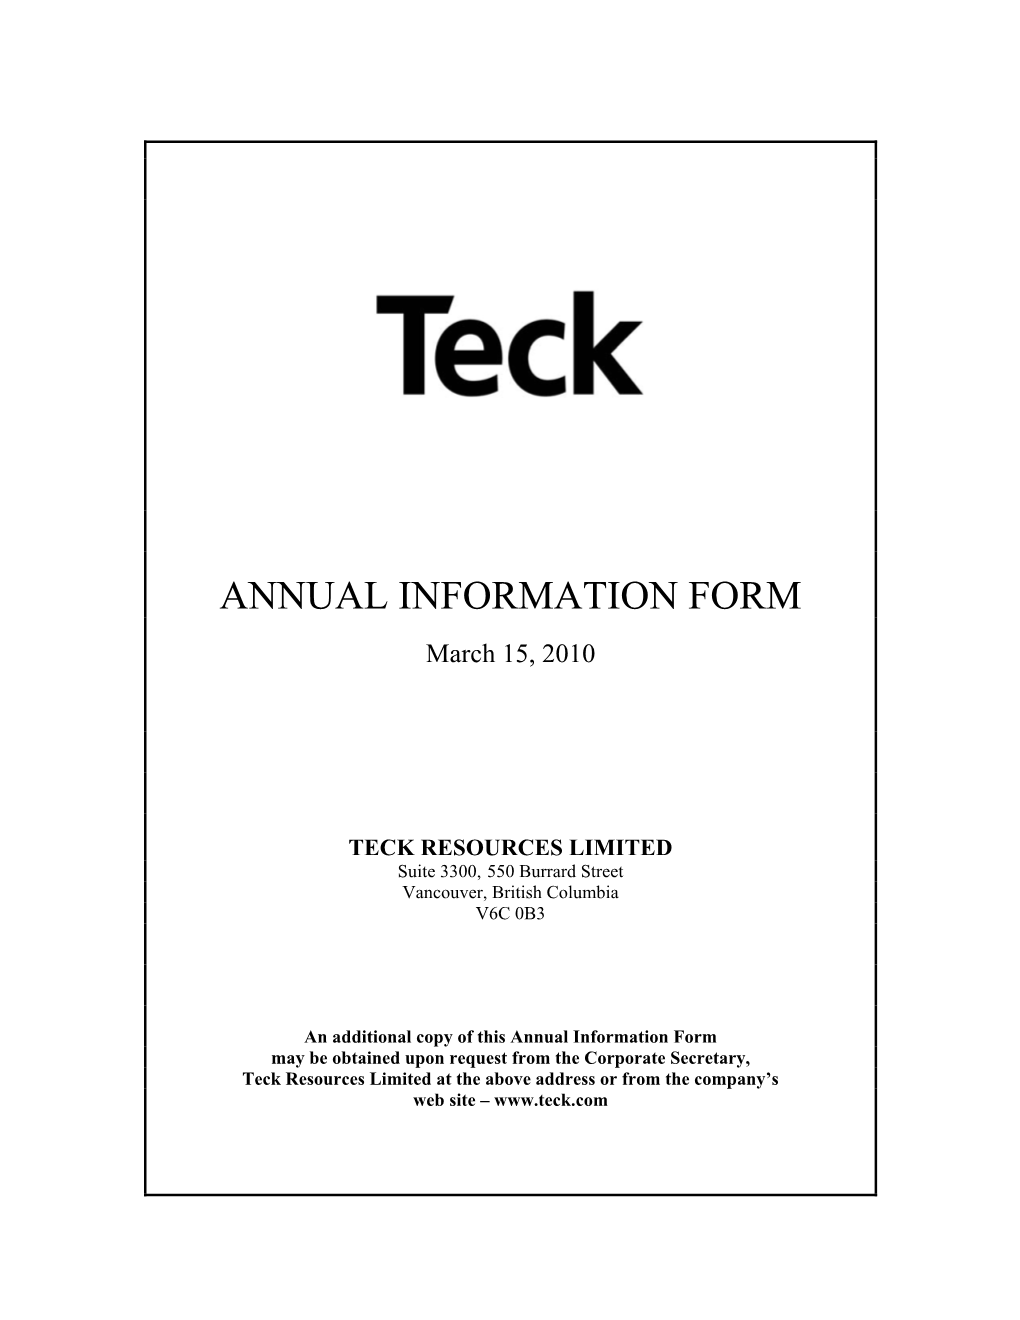 Teck Annual Information Form